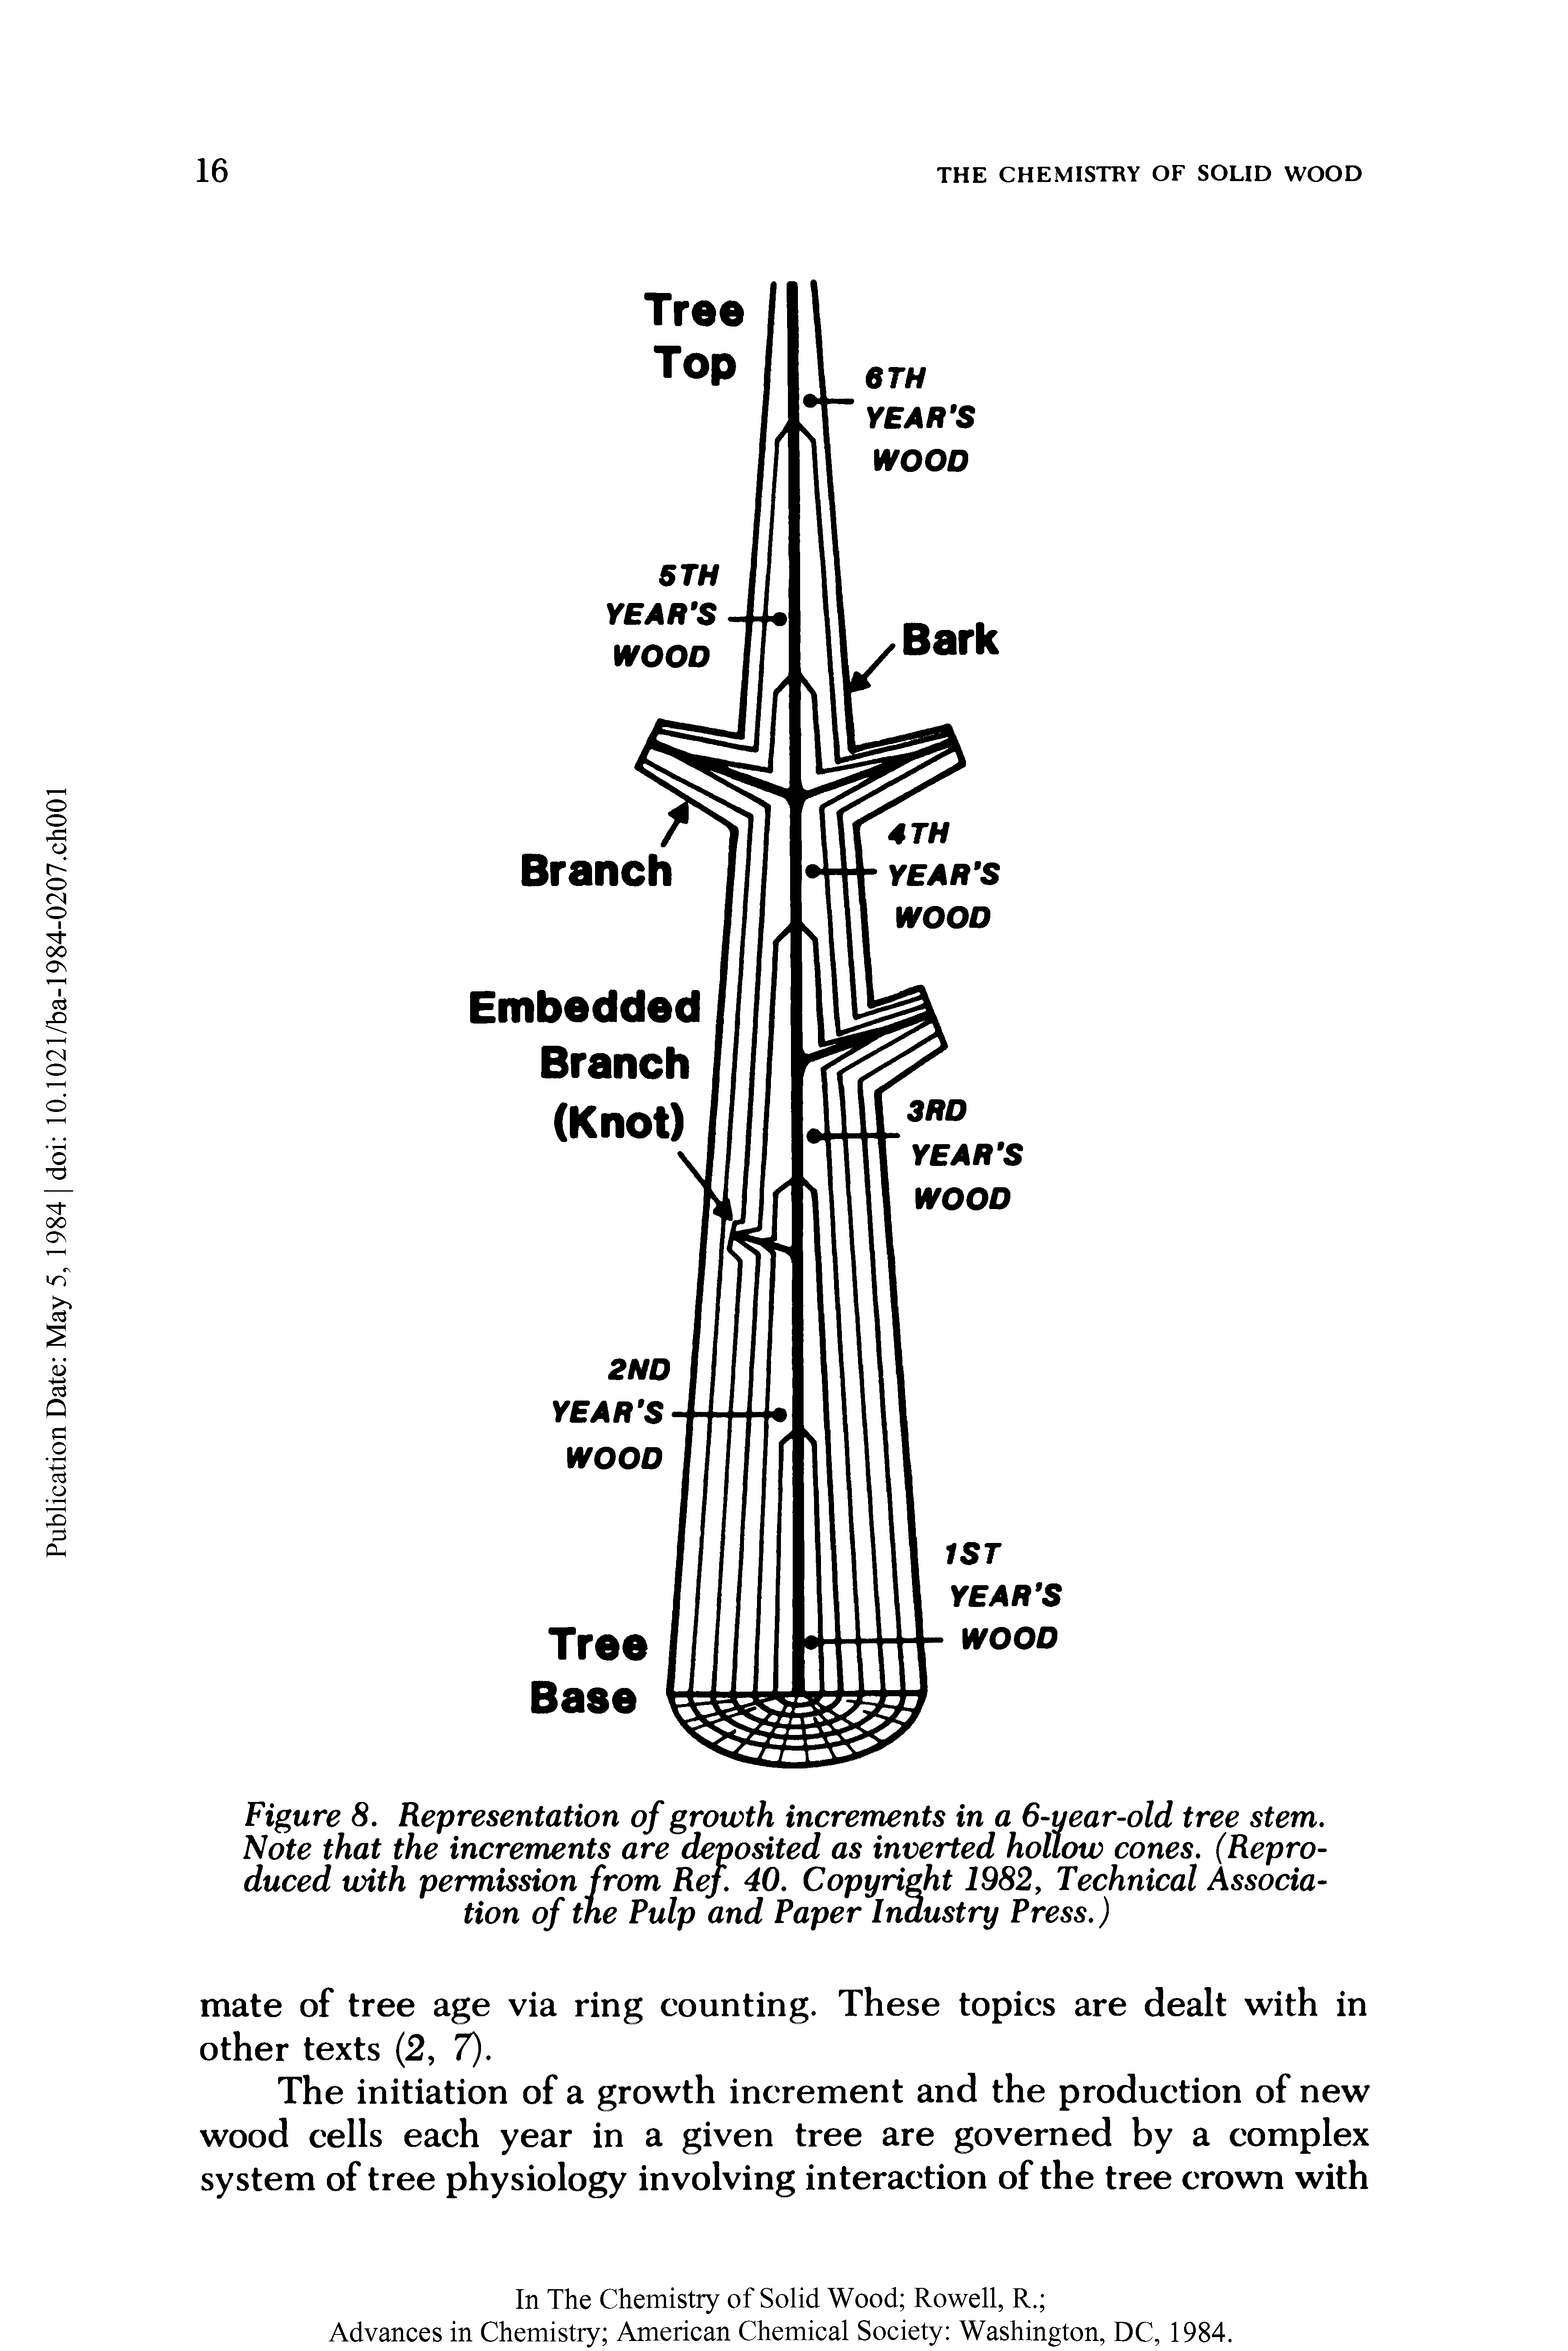 Figure 8. Representation of growth increments in a 6-tjear-old tree stem. Note that the increments are deposited as inverted hollow cones. (Reproduced with permission from Ref. 40. Copyright 1982, Technical Association of the Pulp and Paper Industry Press.)...